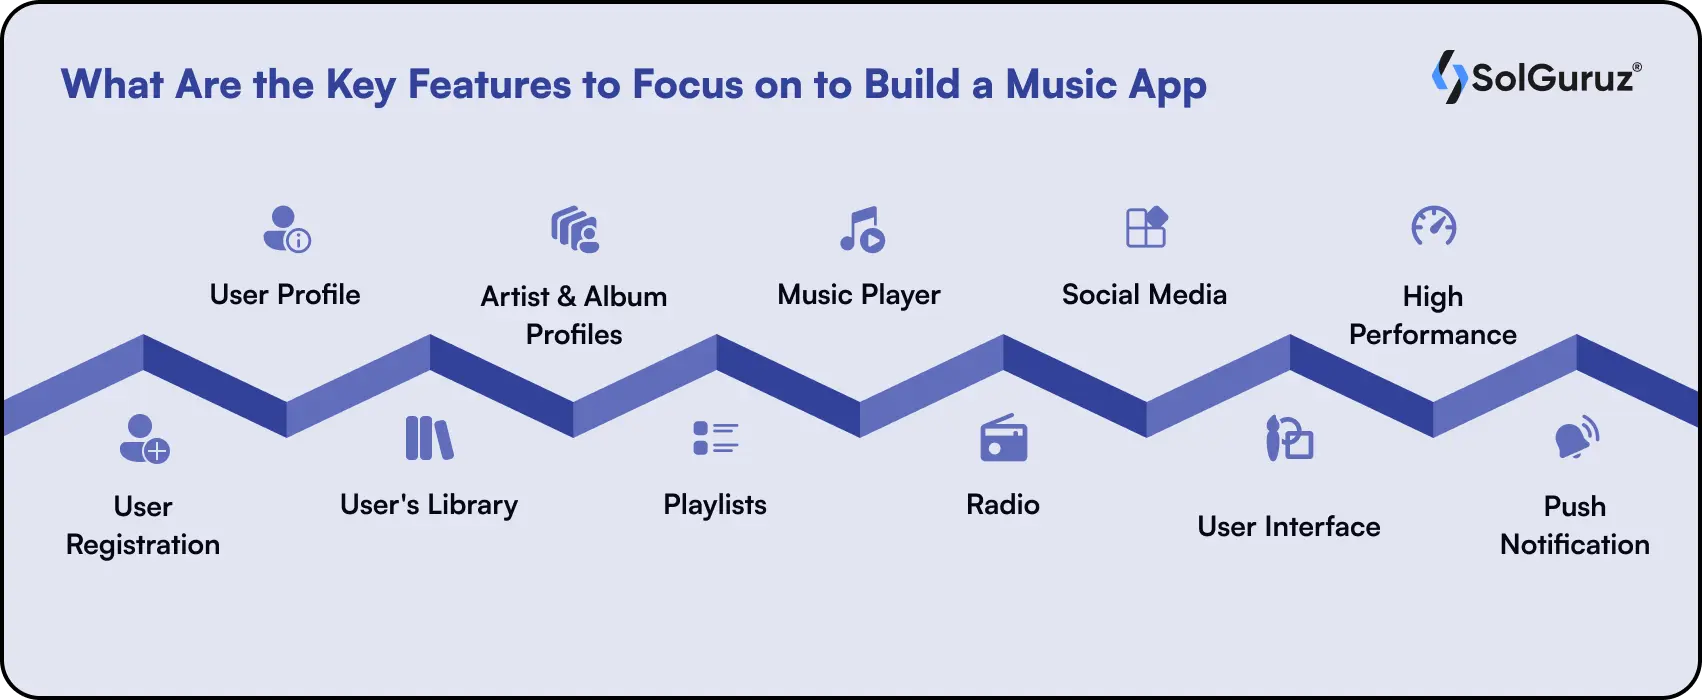 What Are the Key Features to Focus on to Build a Music App